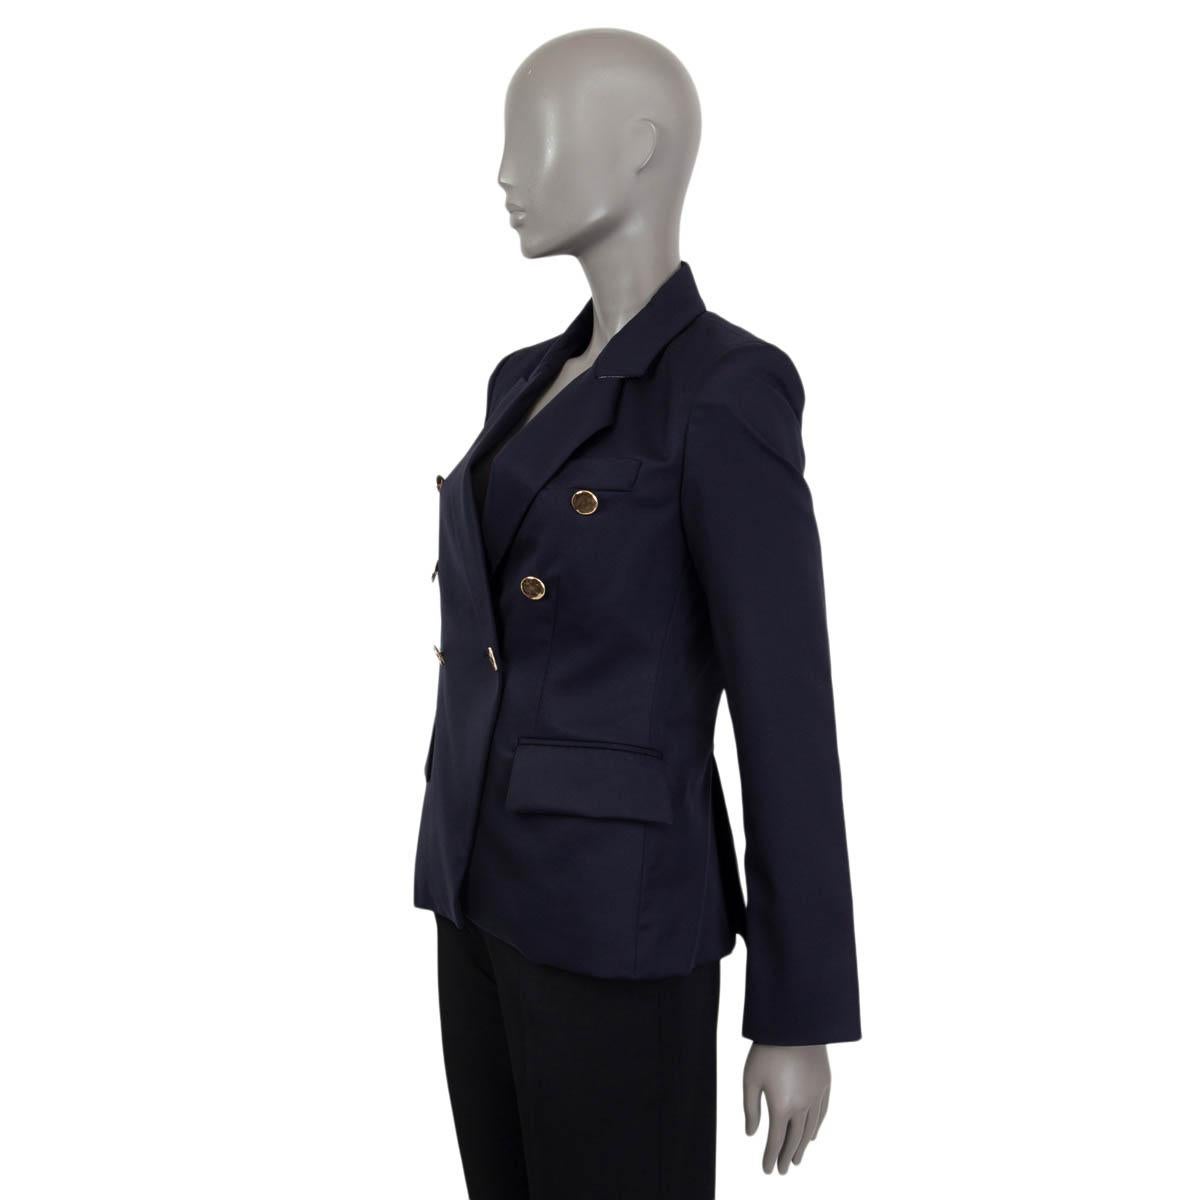 100% authentic Stella McCartney 'Robin' double breasted blazer in navy wool (100%). Features padded shoulders, a sewn shut chest pocket and two flap pockets on the front. Opens with two golden buttons on the front. Lined in navy viscose (52%) and